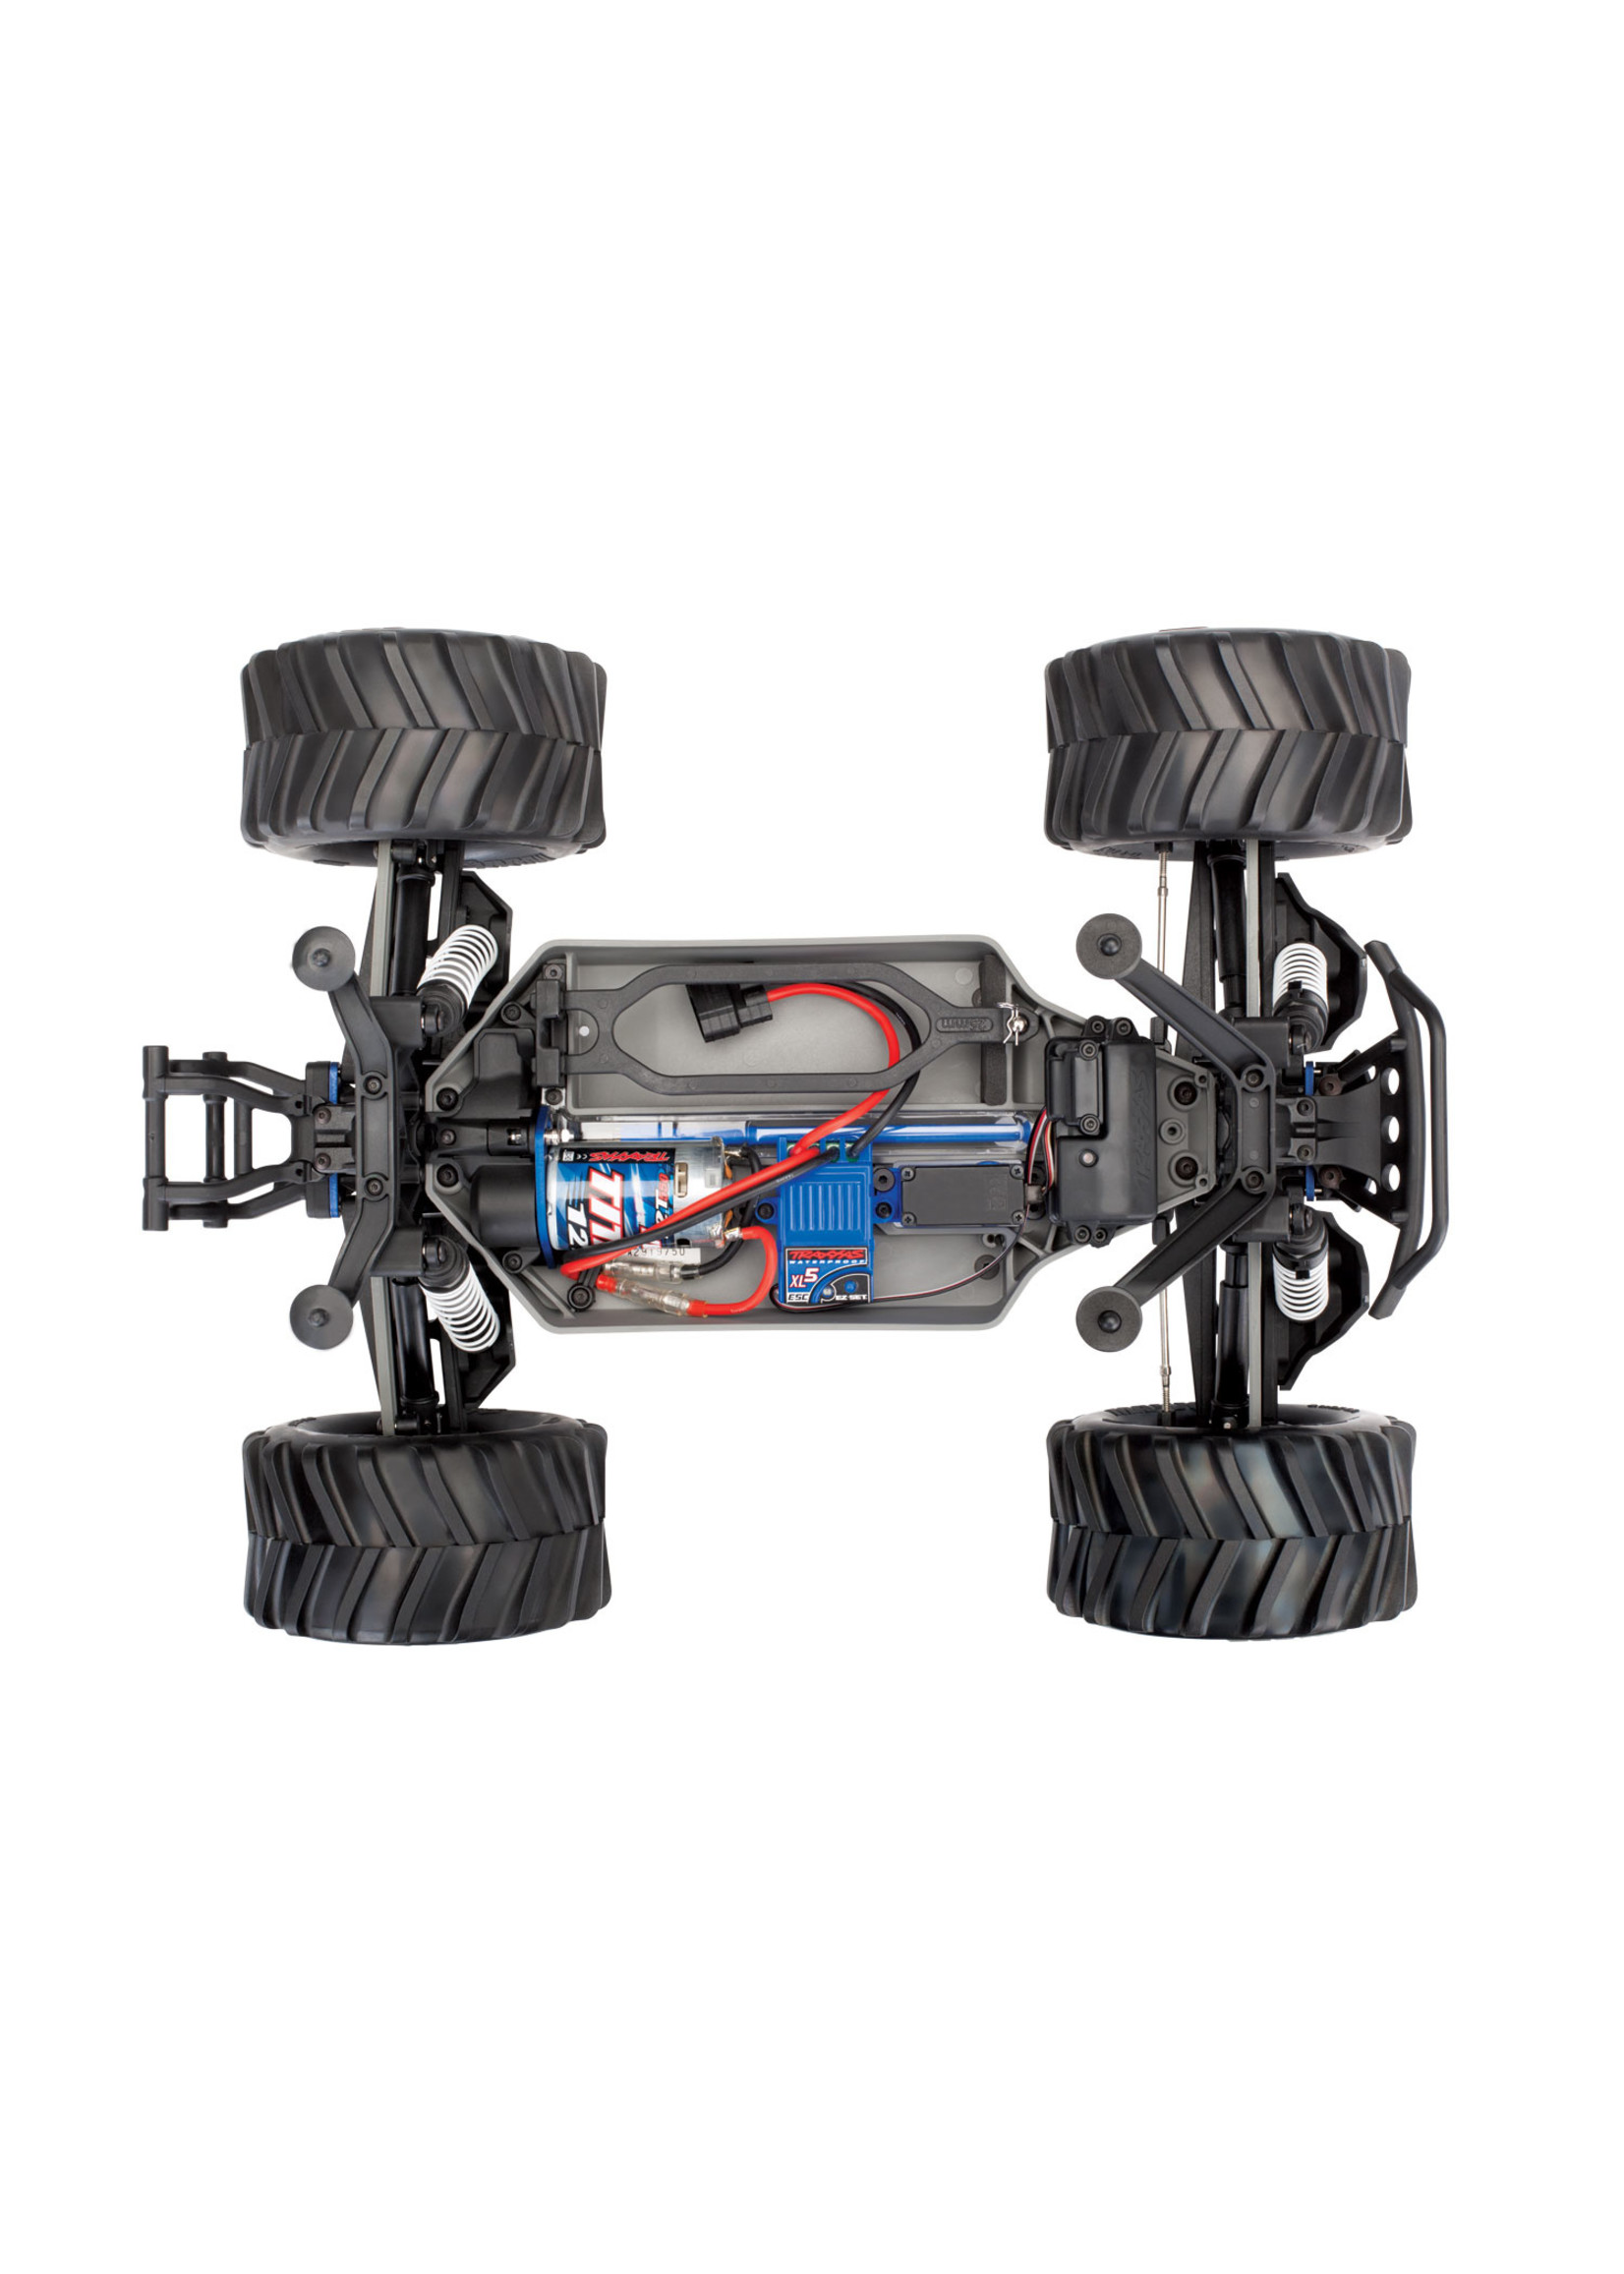 Traxxas 1/10 Stampede 4x4 4WD Monster Truck - Kit